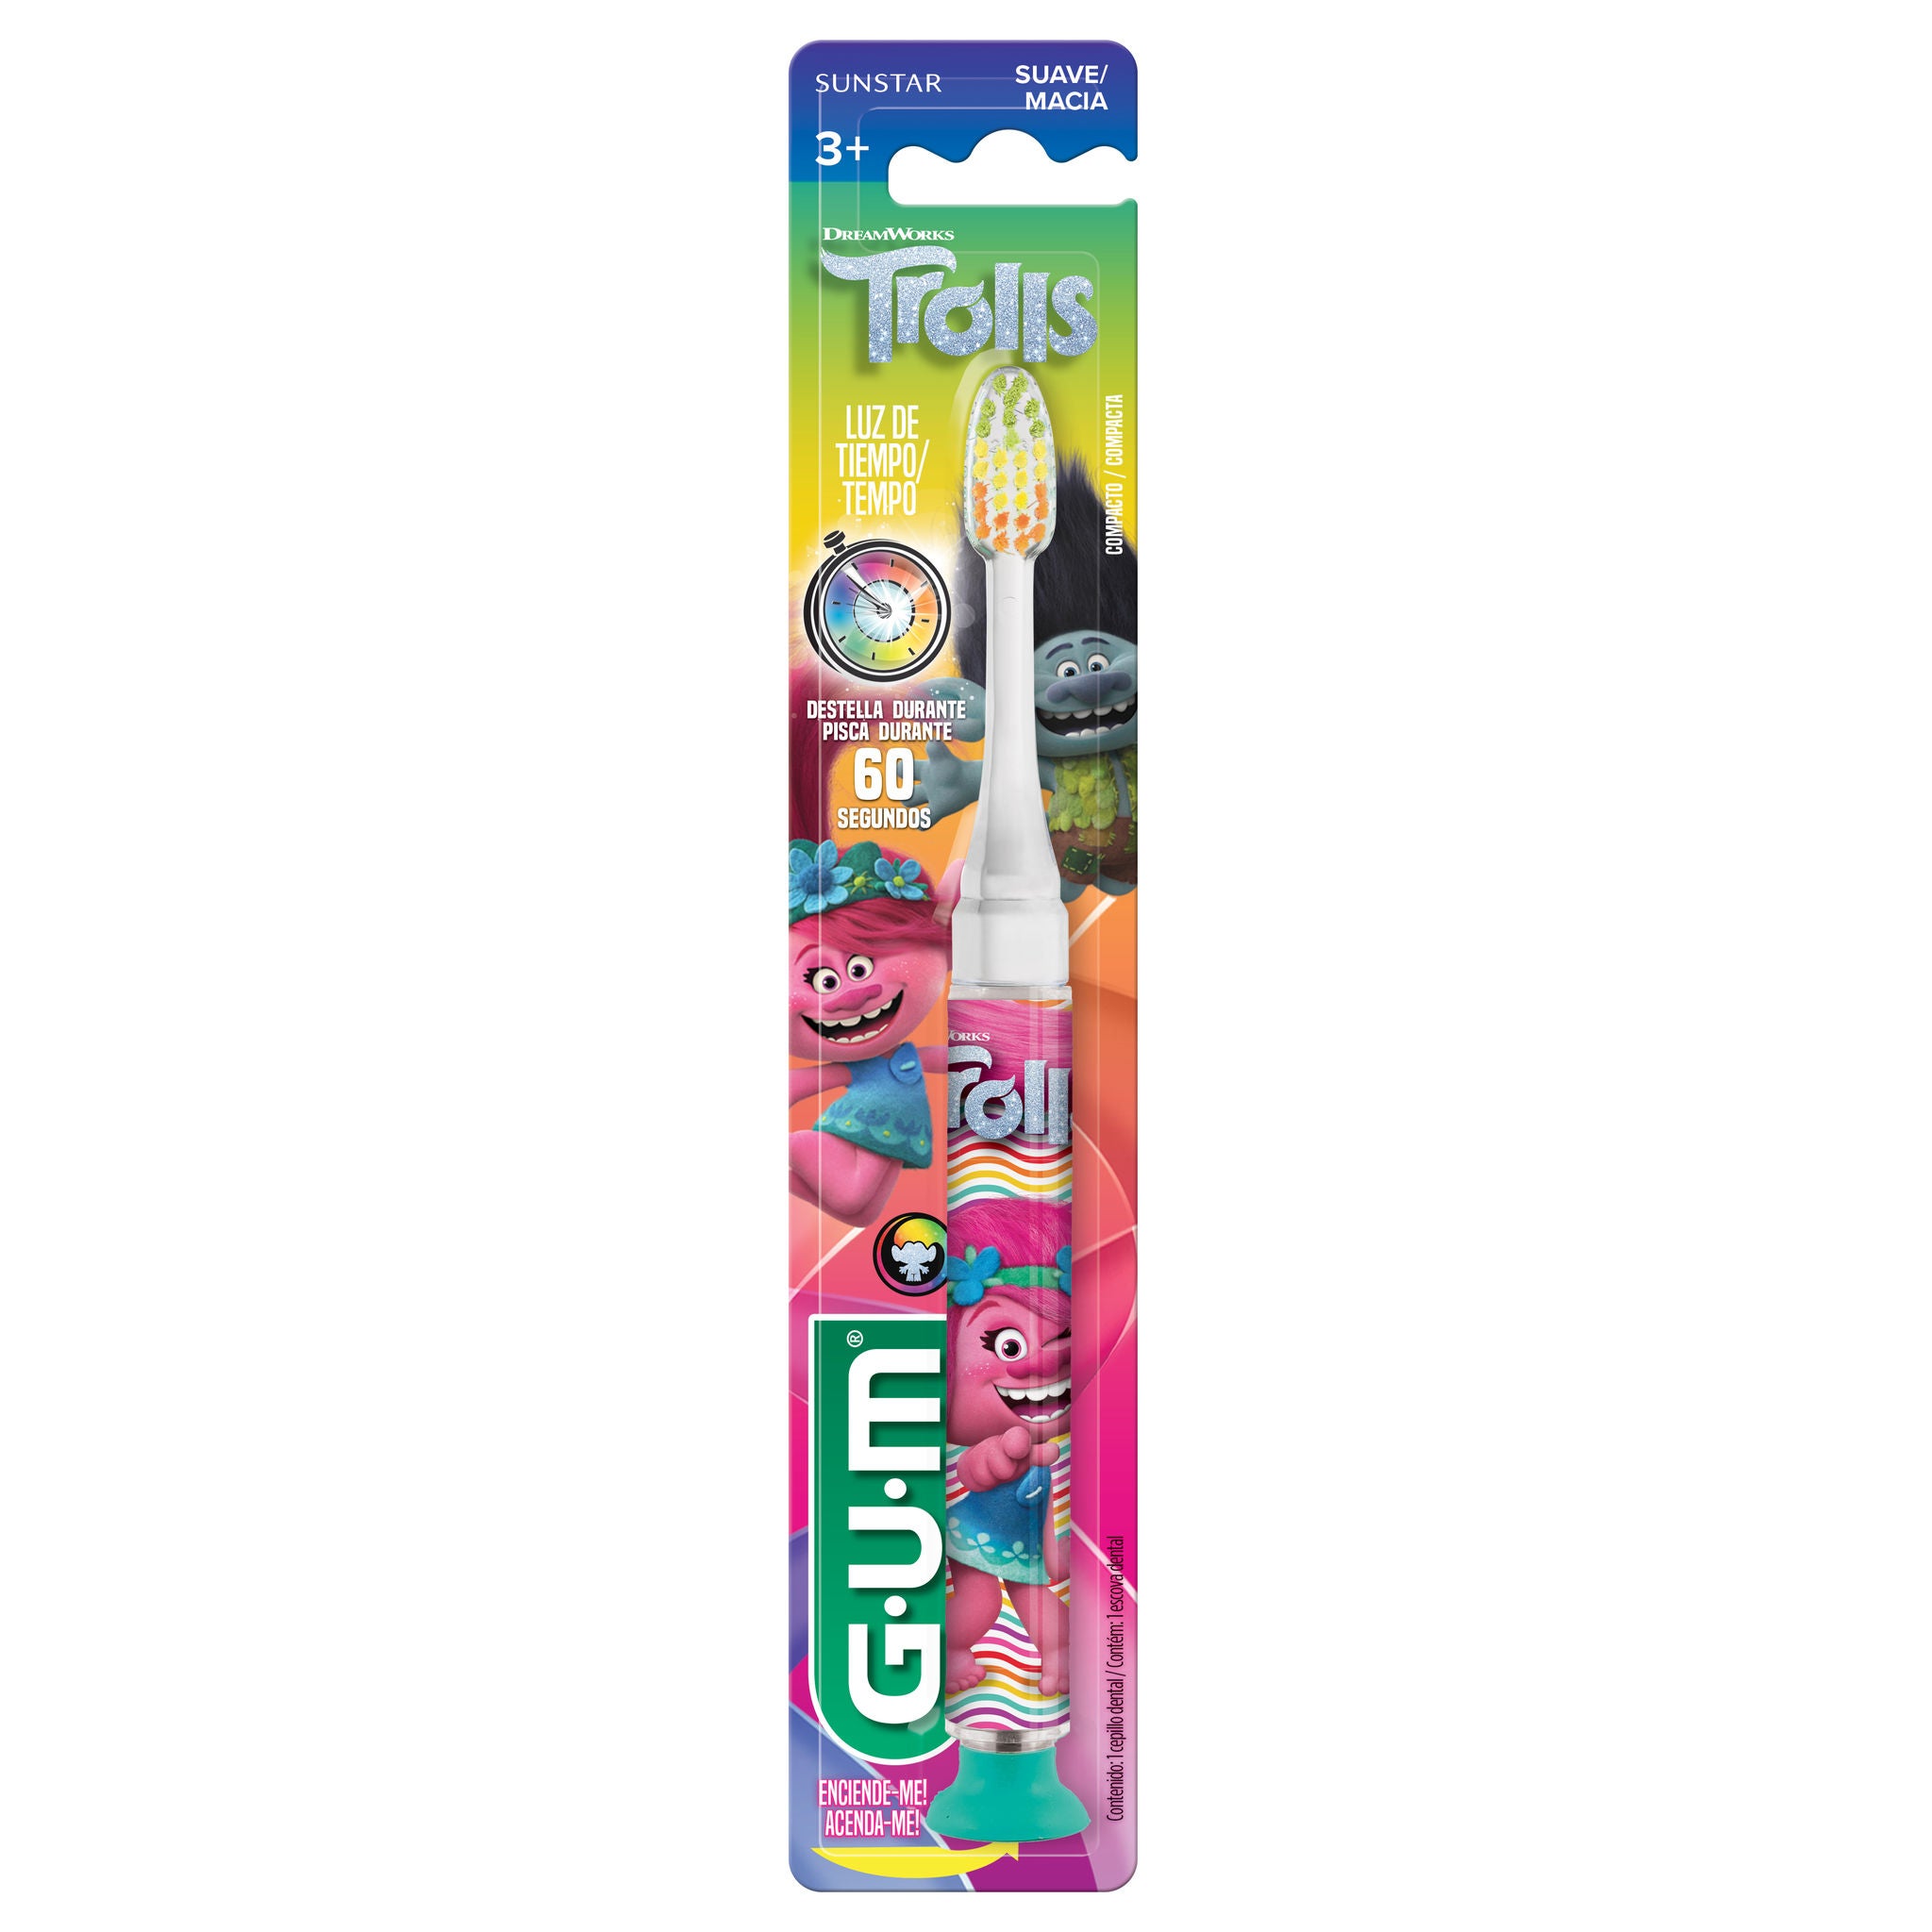 202TRY-Product-Packaging-Toothbrush-Trolls-Lightup-front1-1ct.jpg